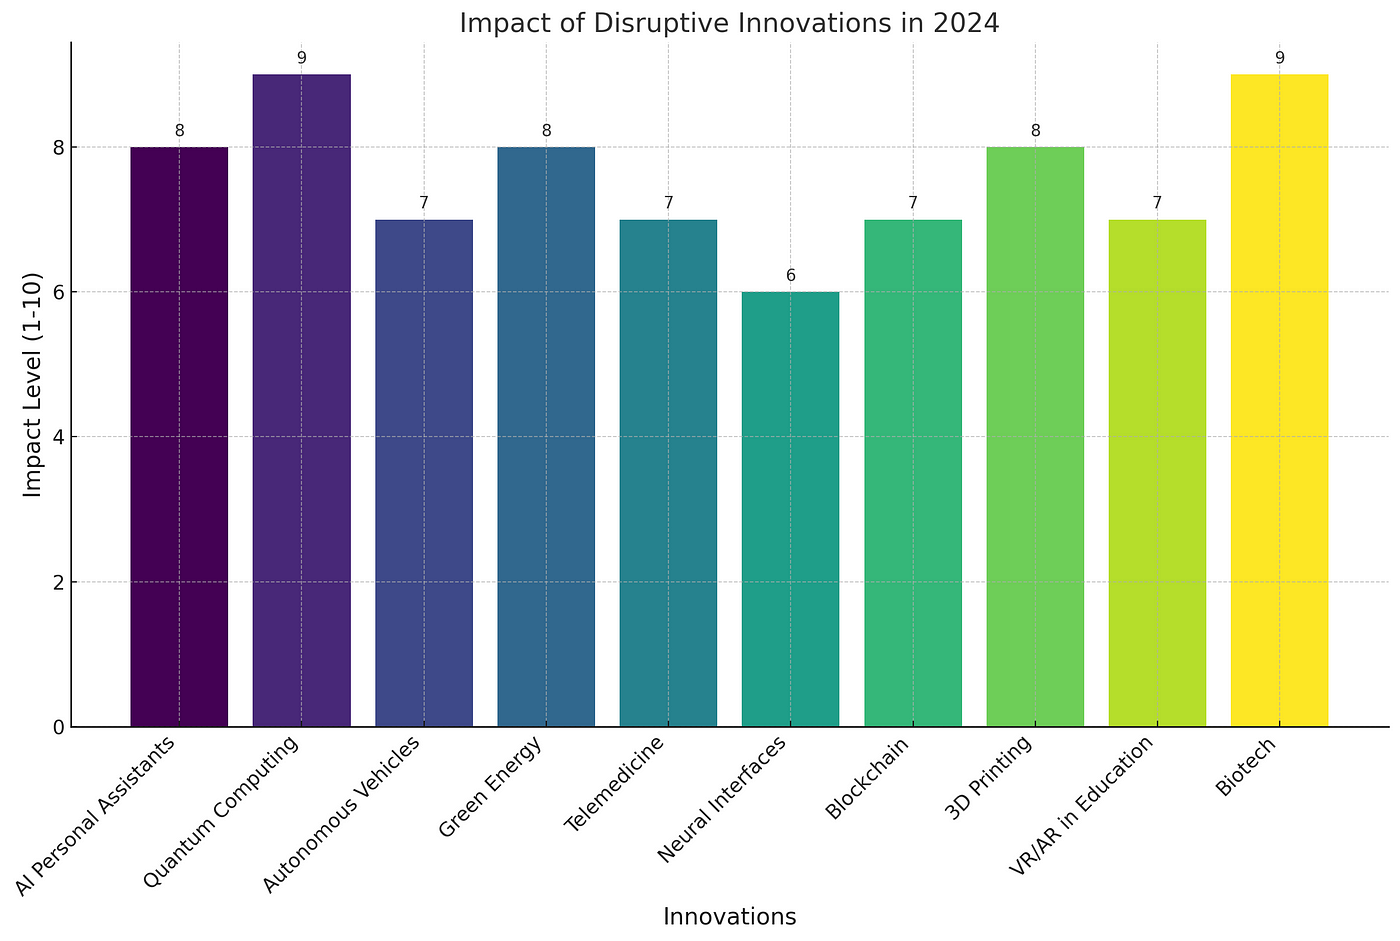 A colorful bar graph titled ‘Impact of Disruptive Innovations in 2024’. It displays ten innovations, including AI Personal Assistants, Quantum Computing, Autonomous Vehicles, Green Energy, Telemedicine, Neural Interfaces, Blockchain, 3D Printing, VR/AR in Education, and Biotech. Each innovation is rated on an impact scale from 1 to 10, with Quantum Computing and Biotech scoring the highest, indicating their significant anticipated impact in 2024.